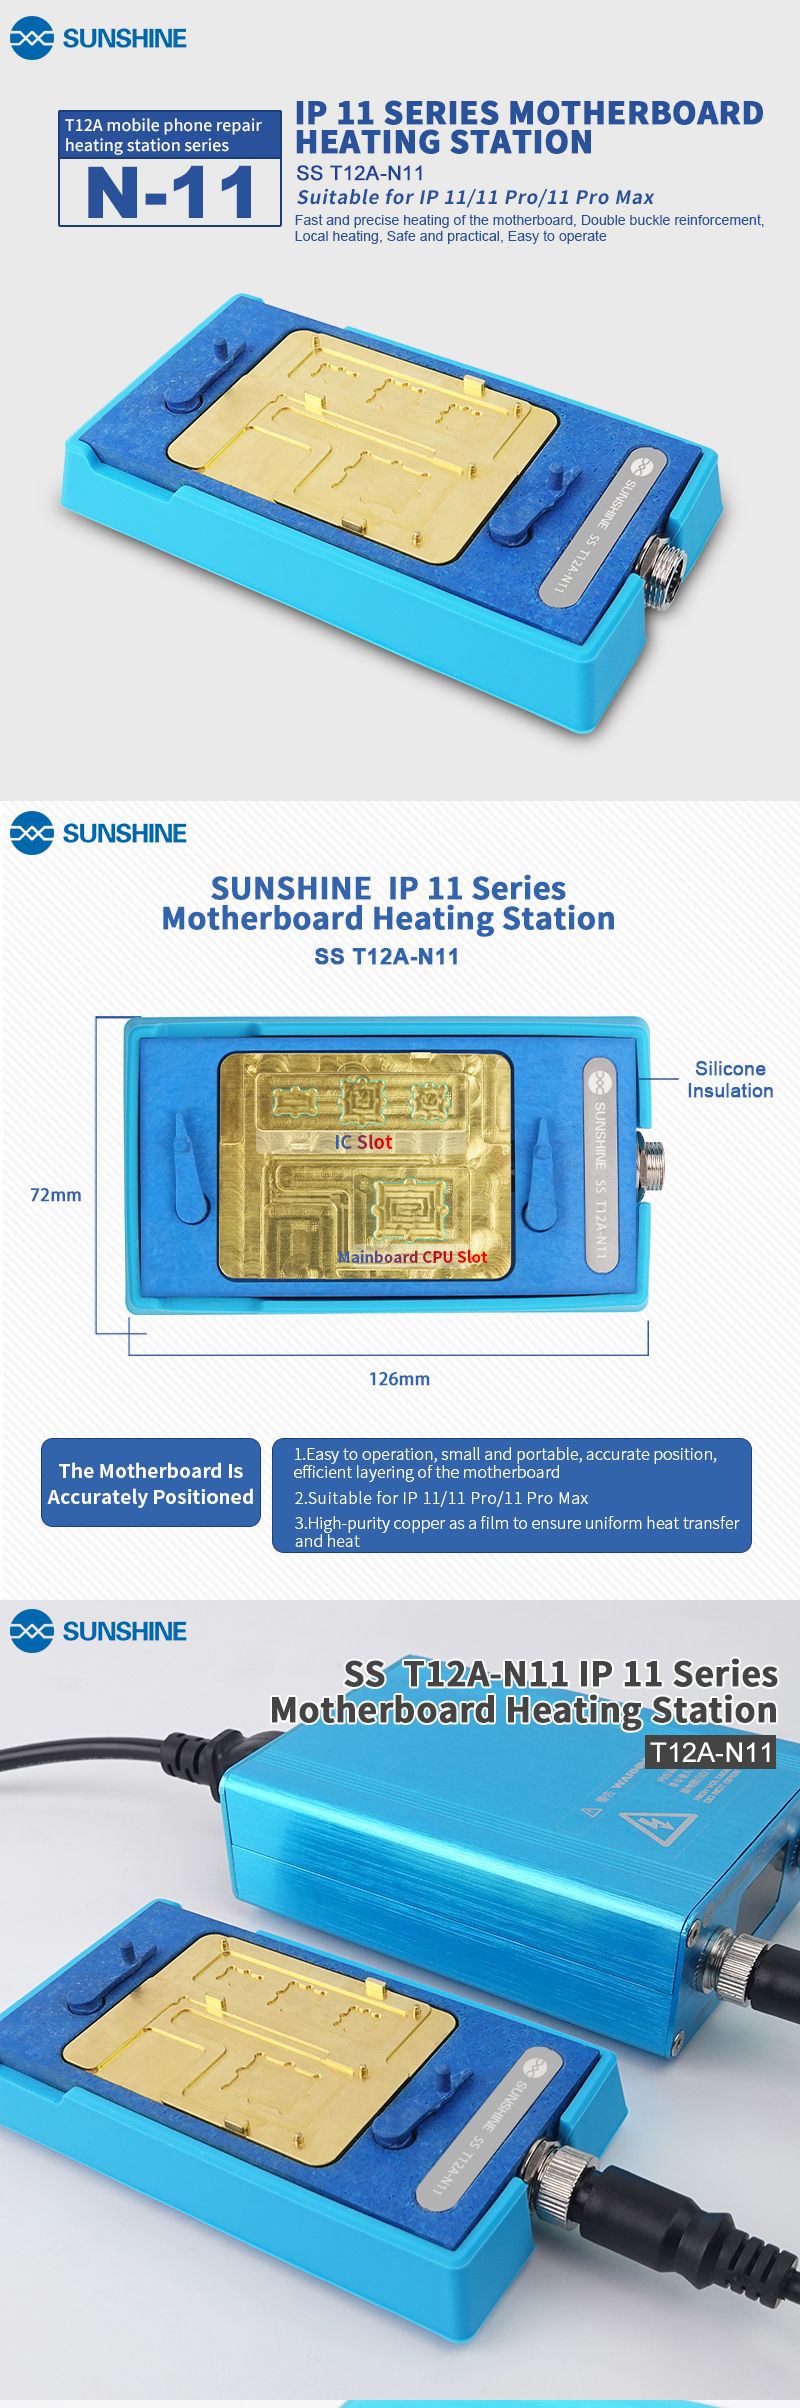 SS-T12A-for-iPhone-X-Motherboard-Stratified-Heating-Table-185-Degrees-Accurate-Rapid-Separation-Disa-1616602